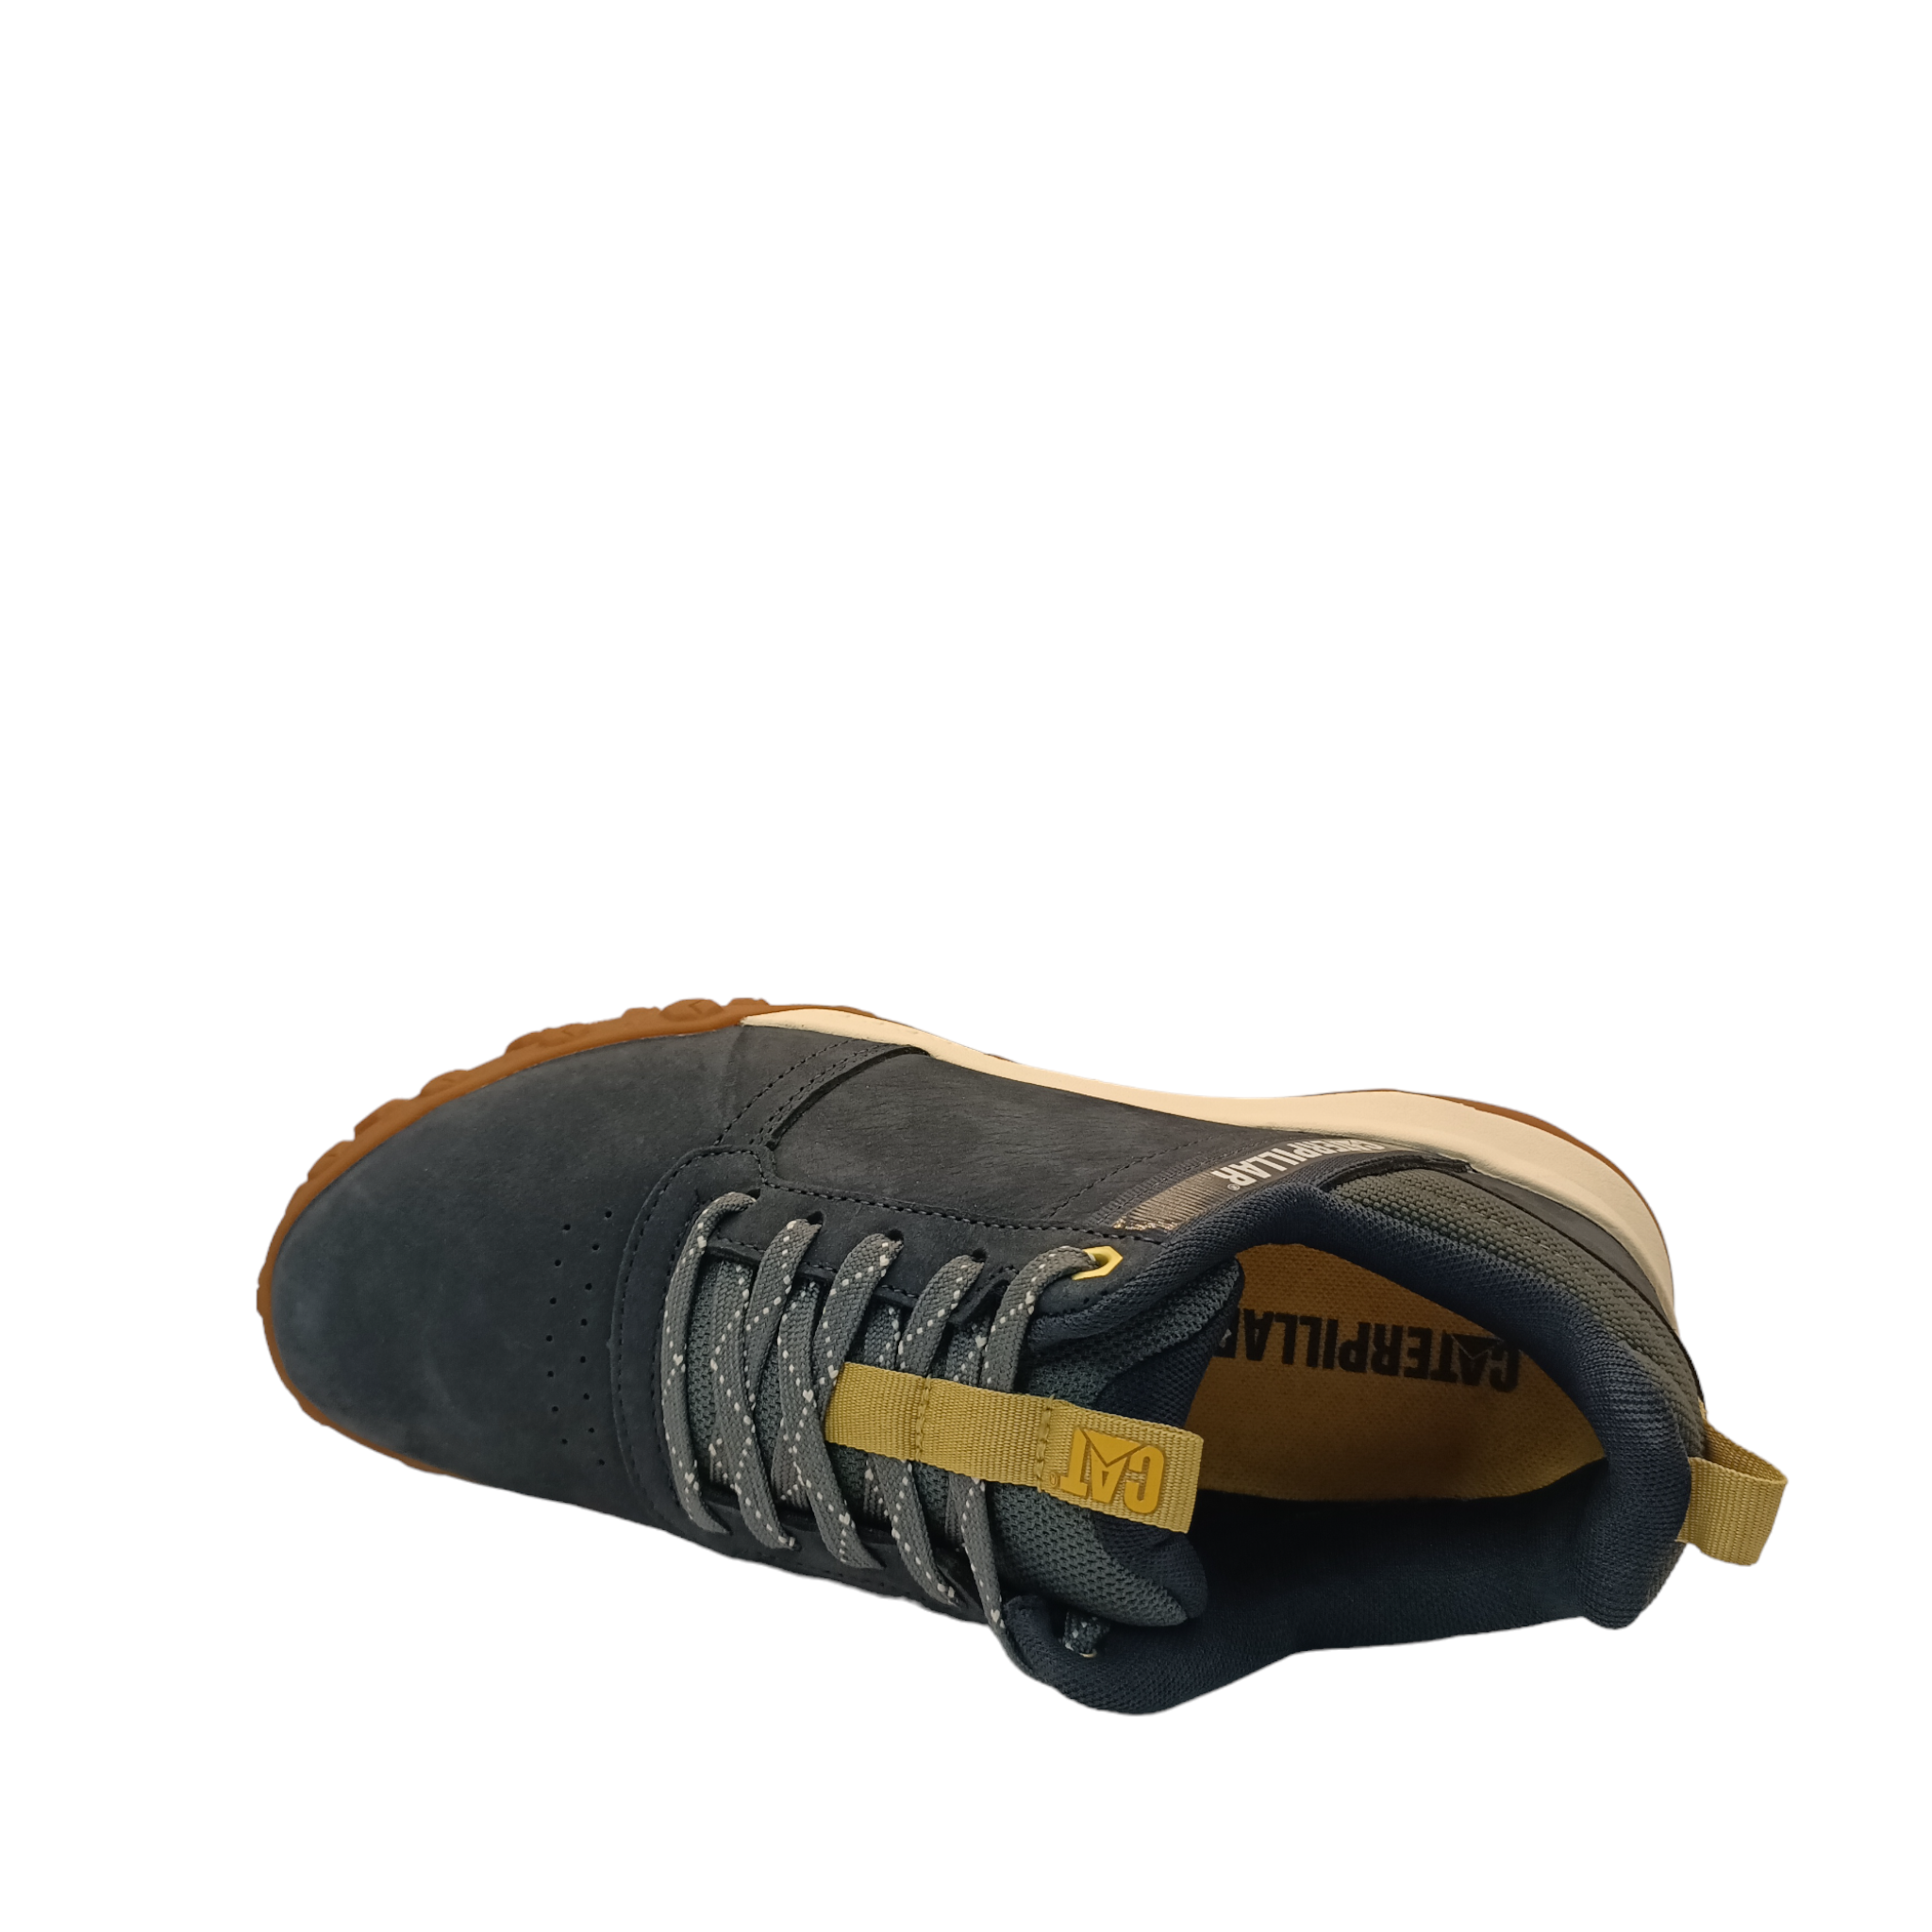 Shop Hex Cush Lo Caterpillar - with shoe&me - from Caterpillar - Shoes - Mens, Sneaker, Winter - [collection]